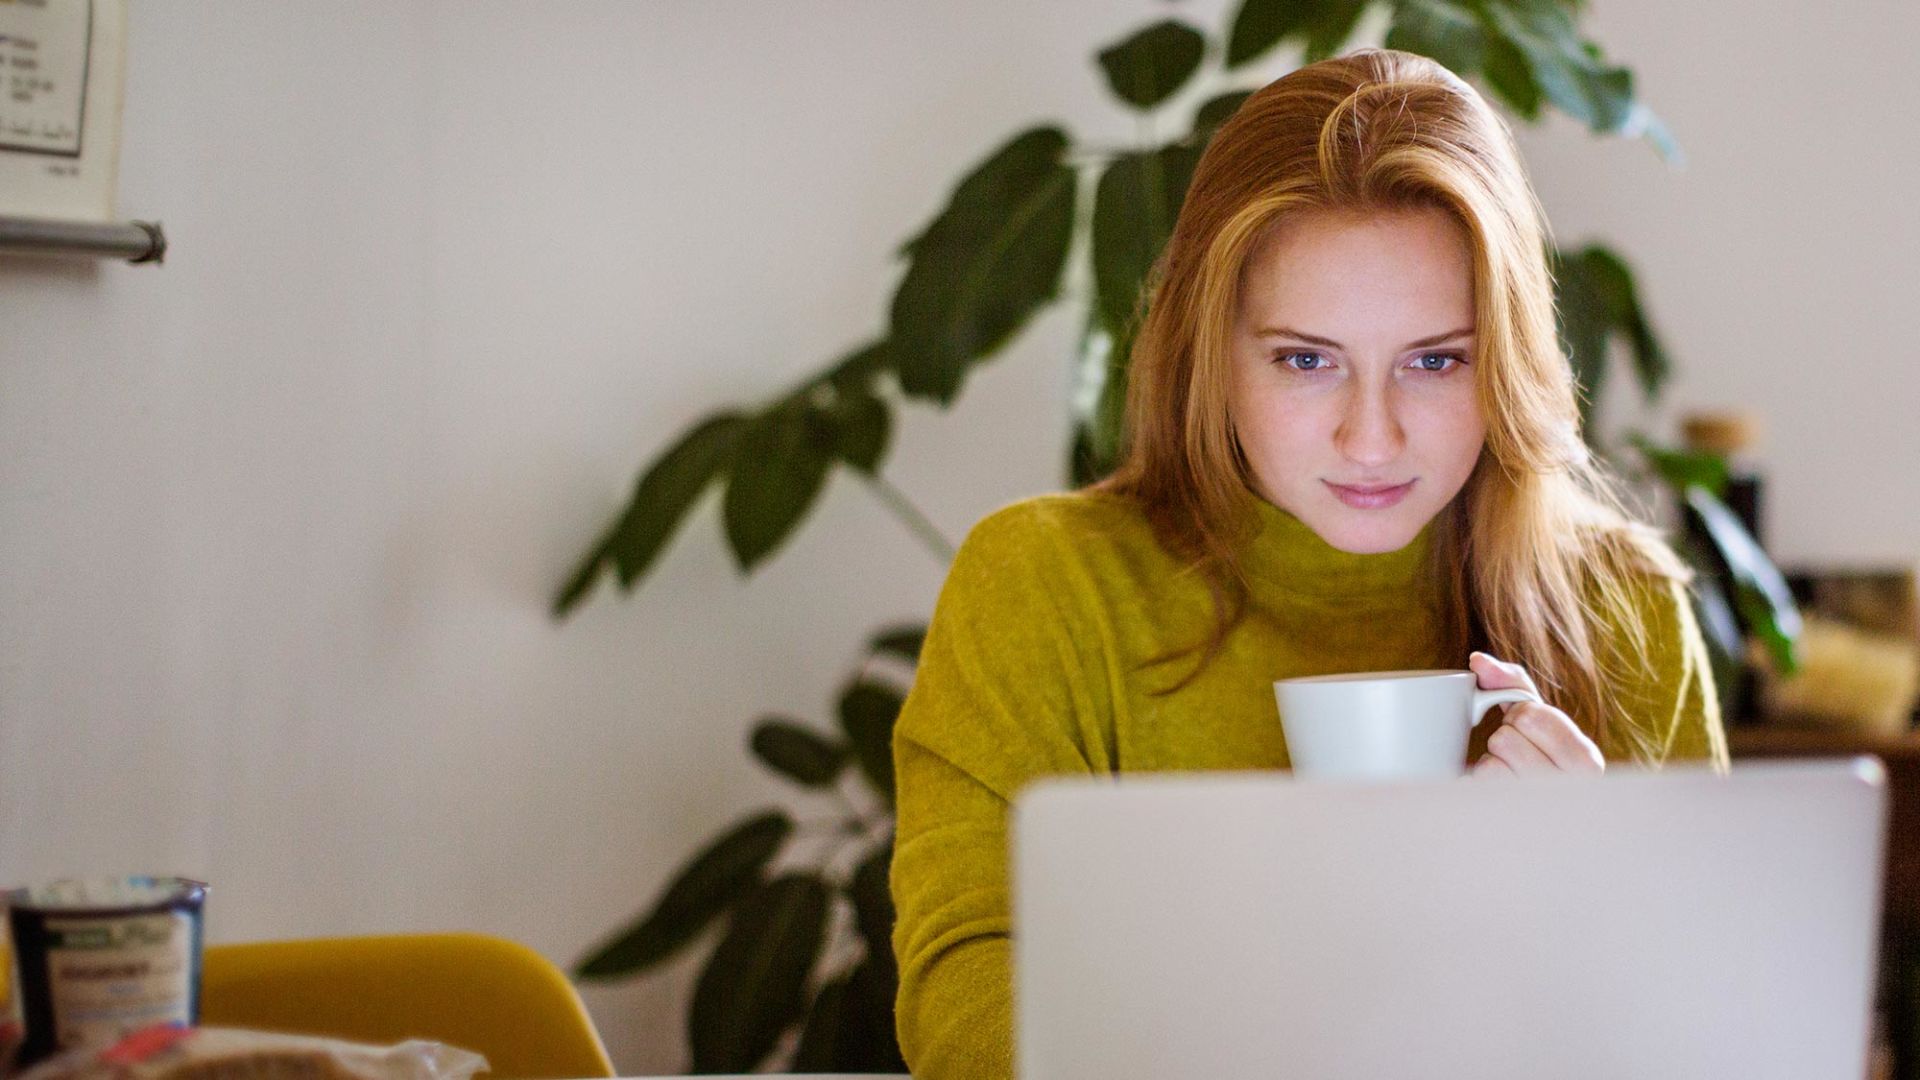 A woman is sitting at home in front of her laptop with a mug in her hand.